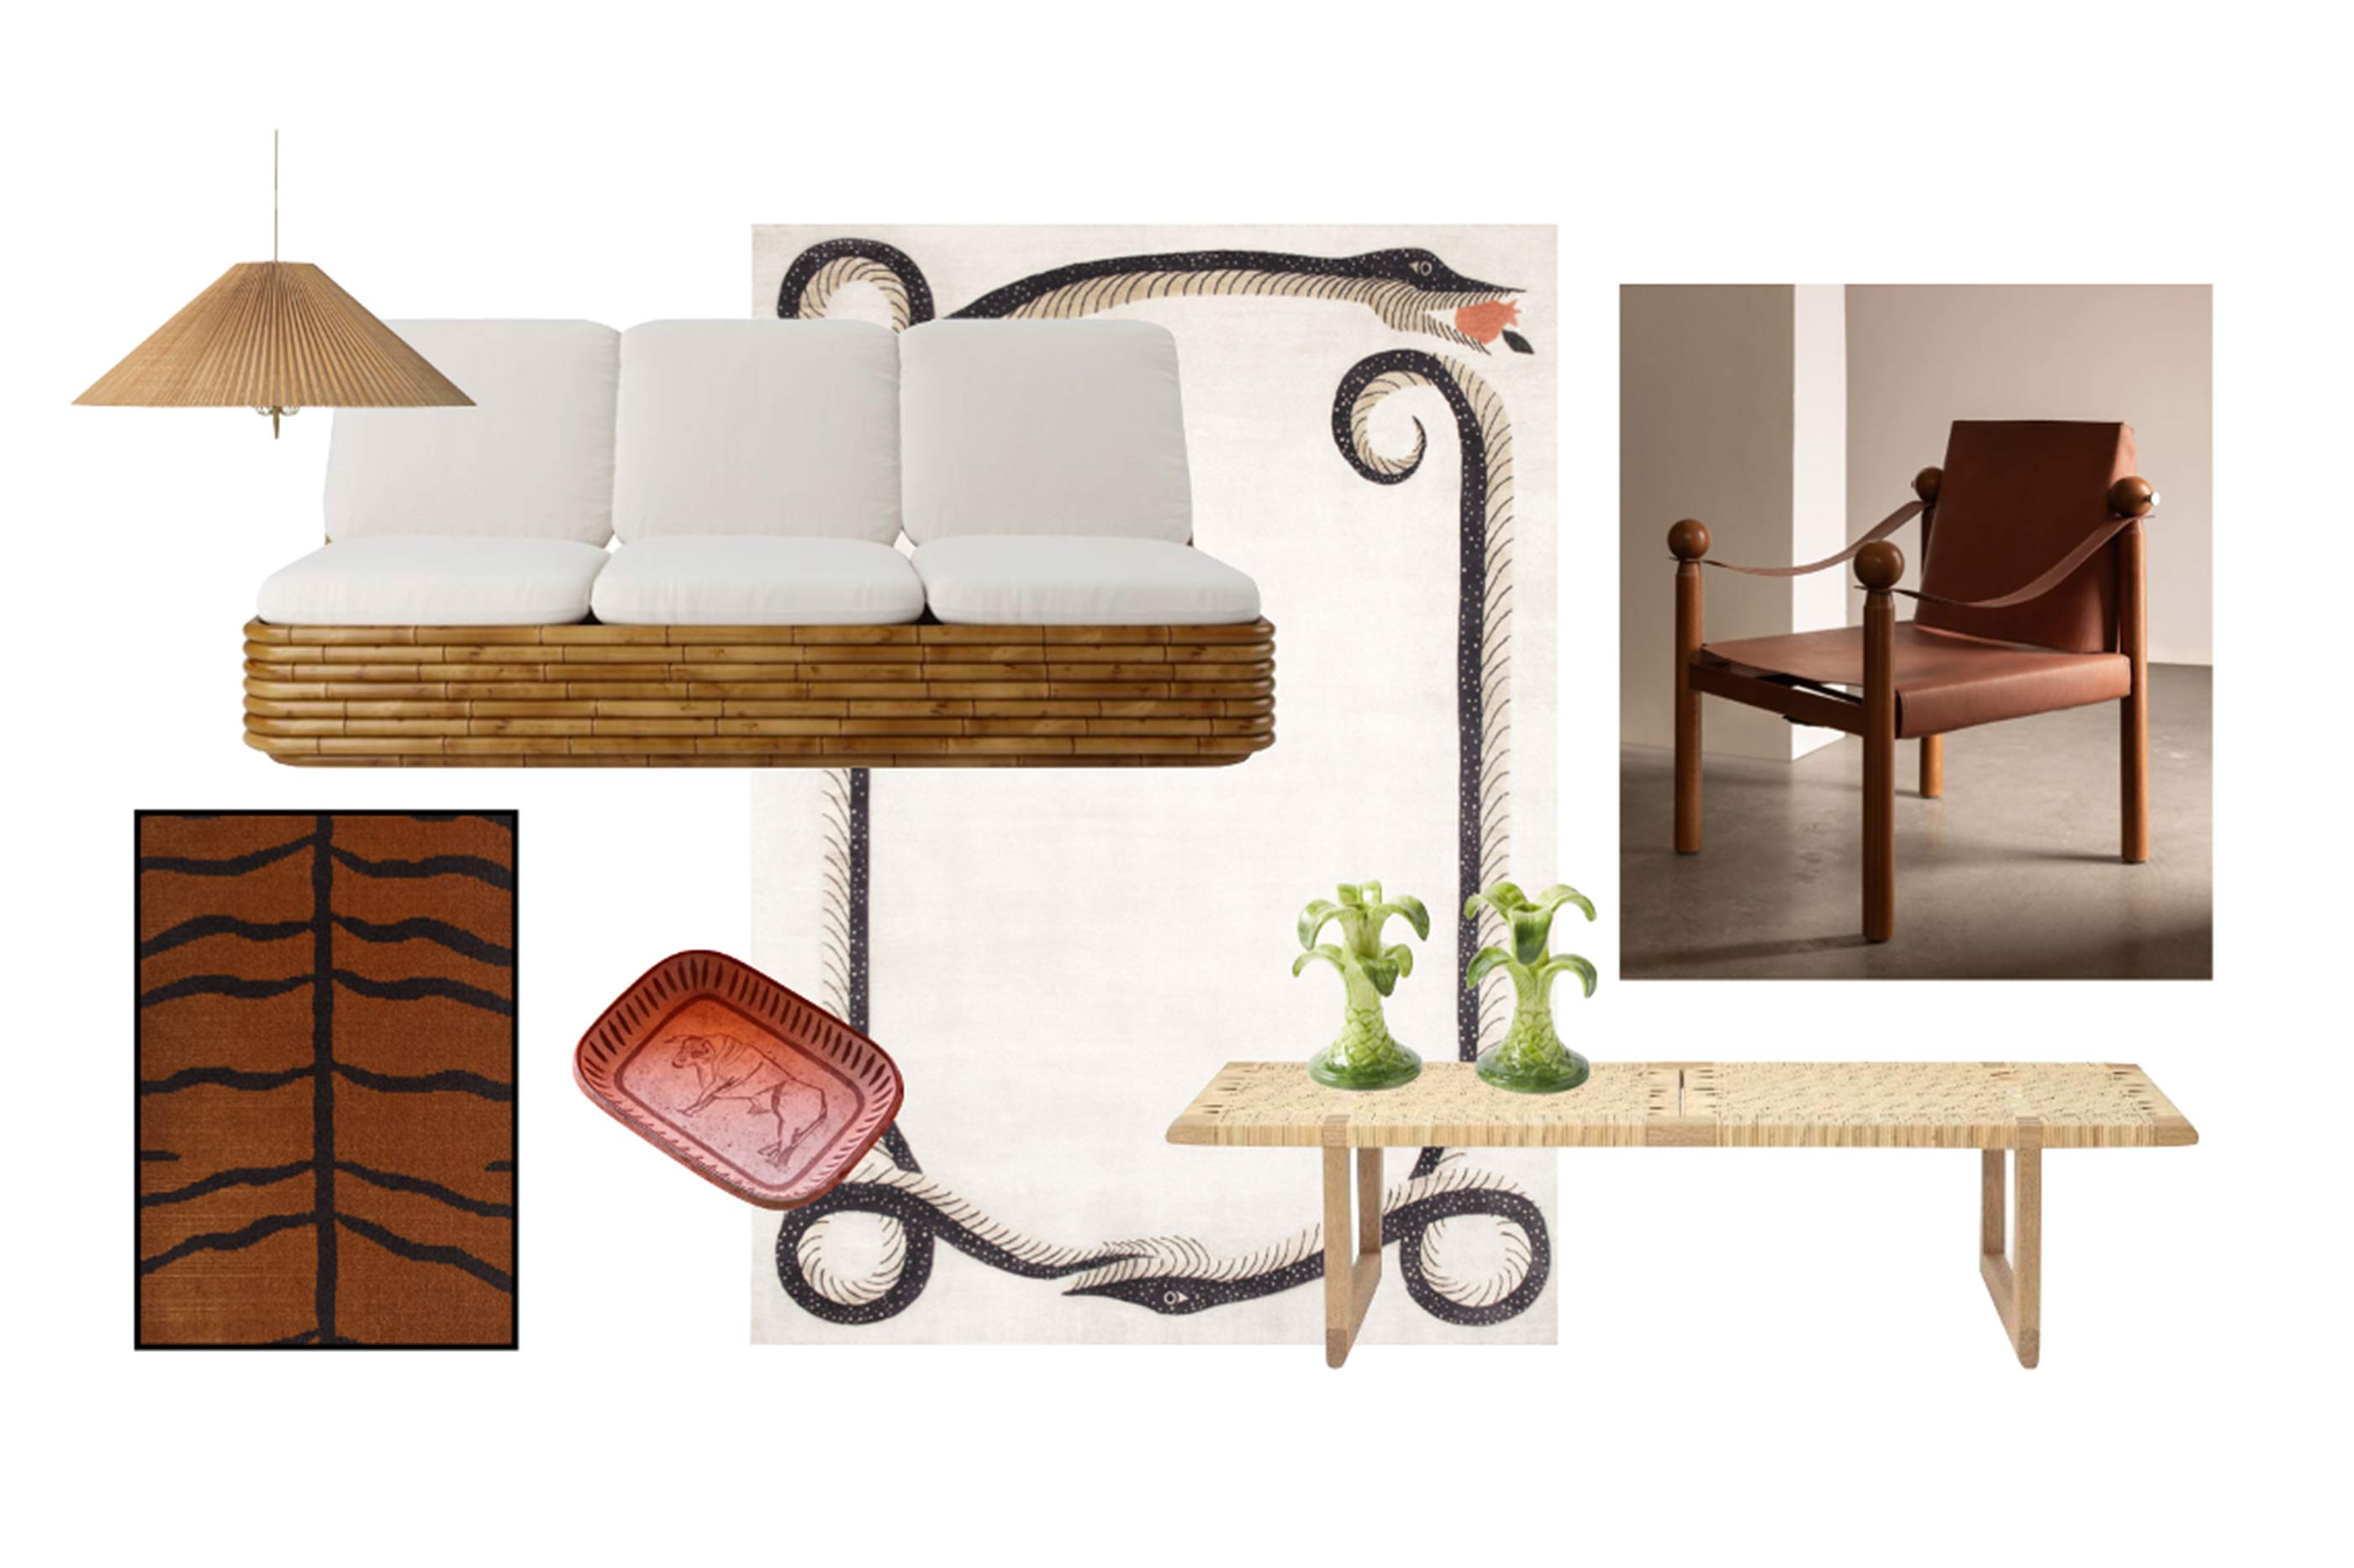 How to introduce Safari Chic-inspired interiors in your home